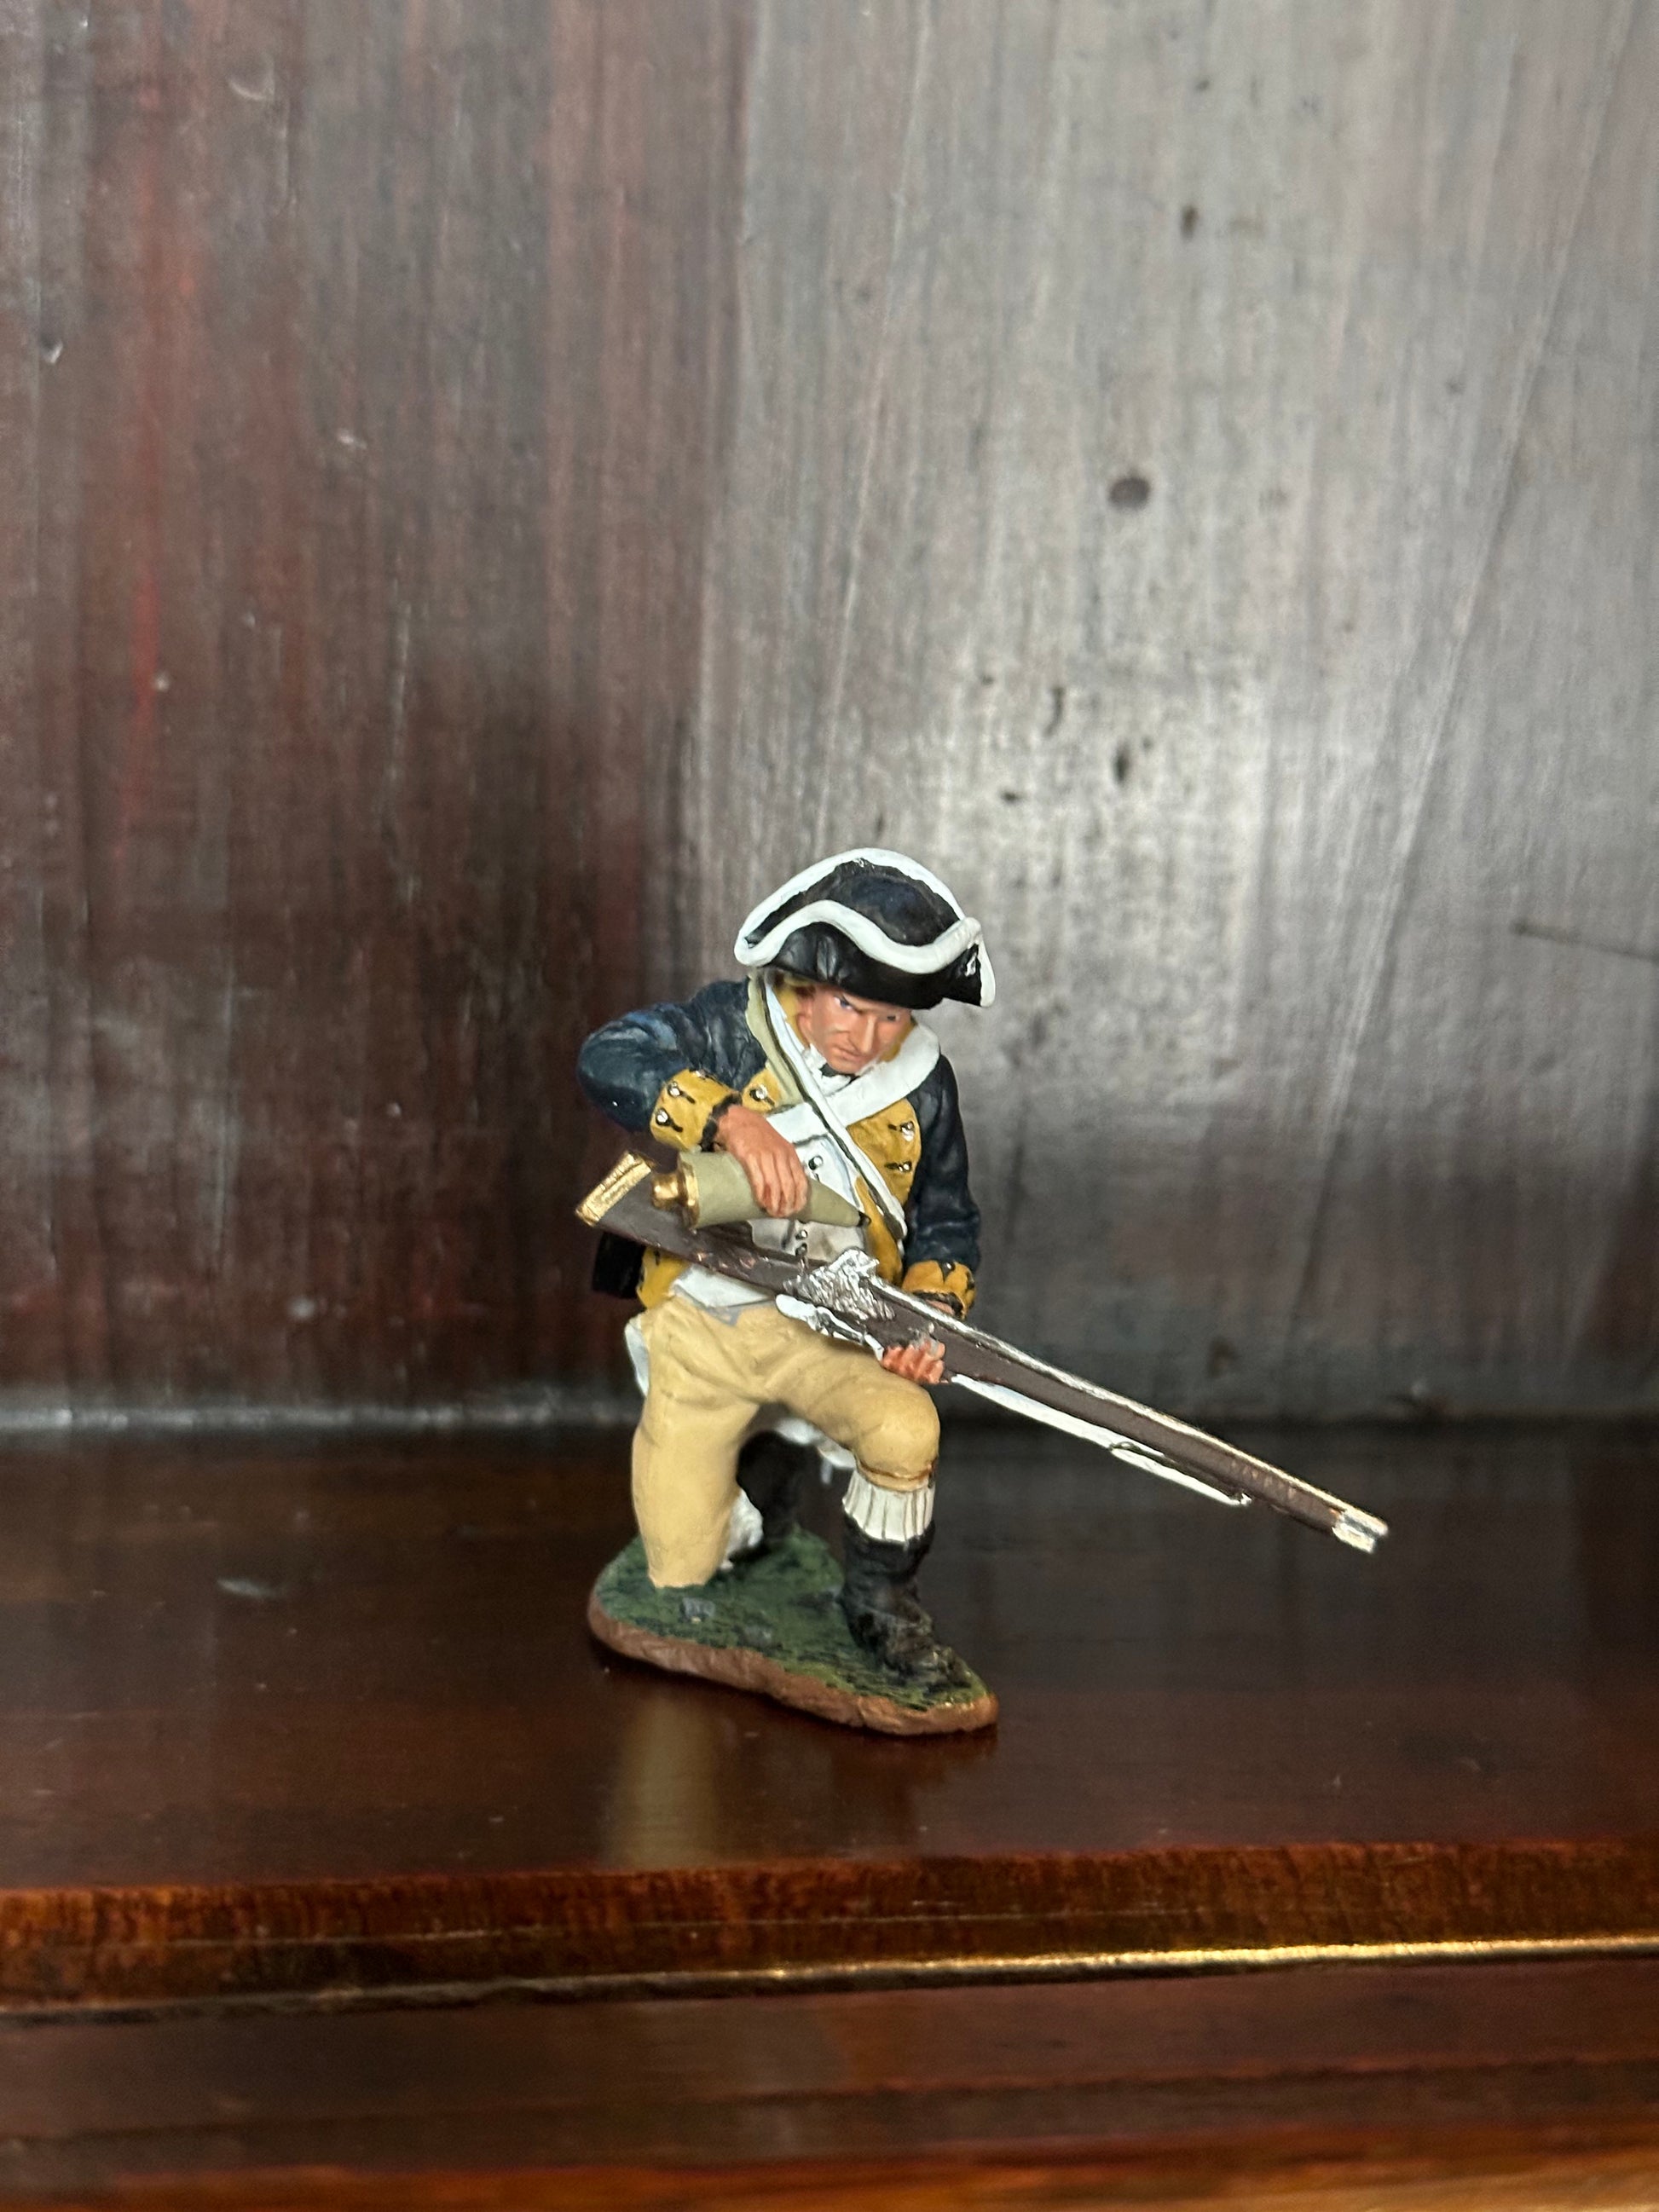 Collectible toy soldier army men Kneeling Loading Rifle. On book shelf.